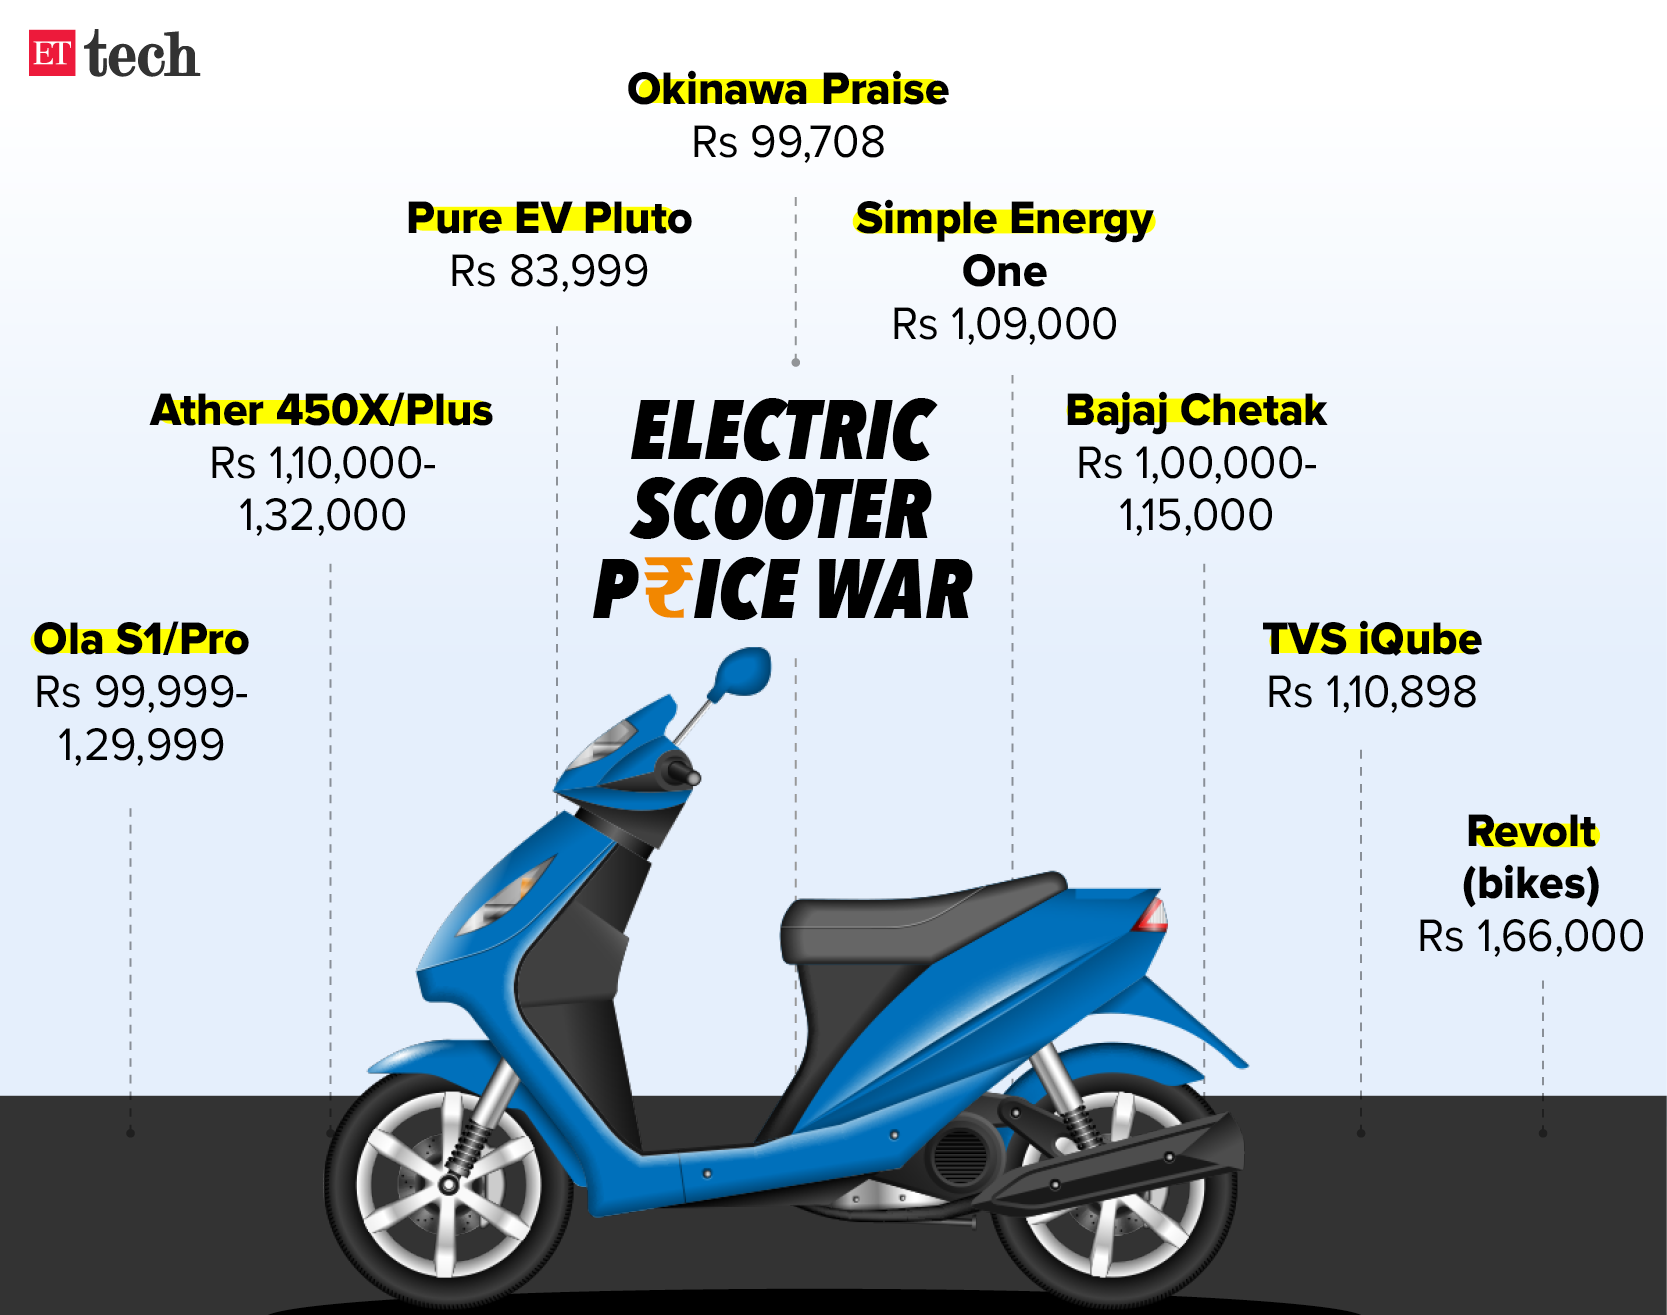 Electric scooter price war